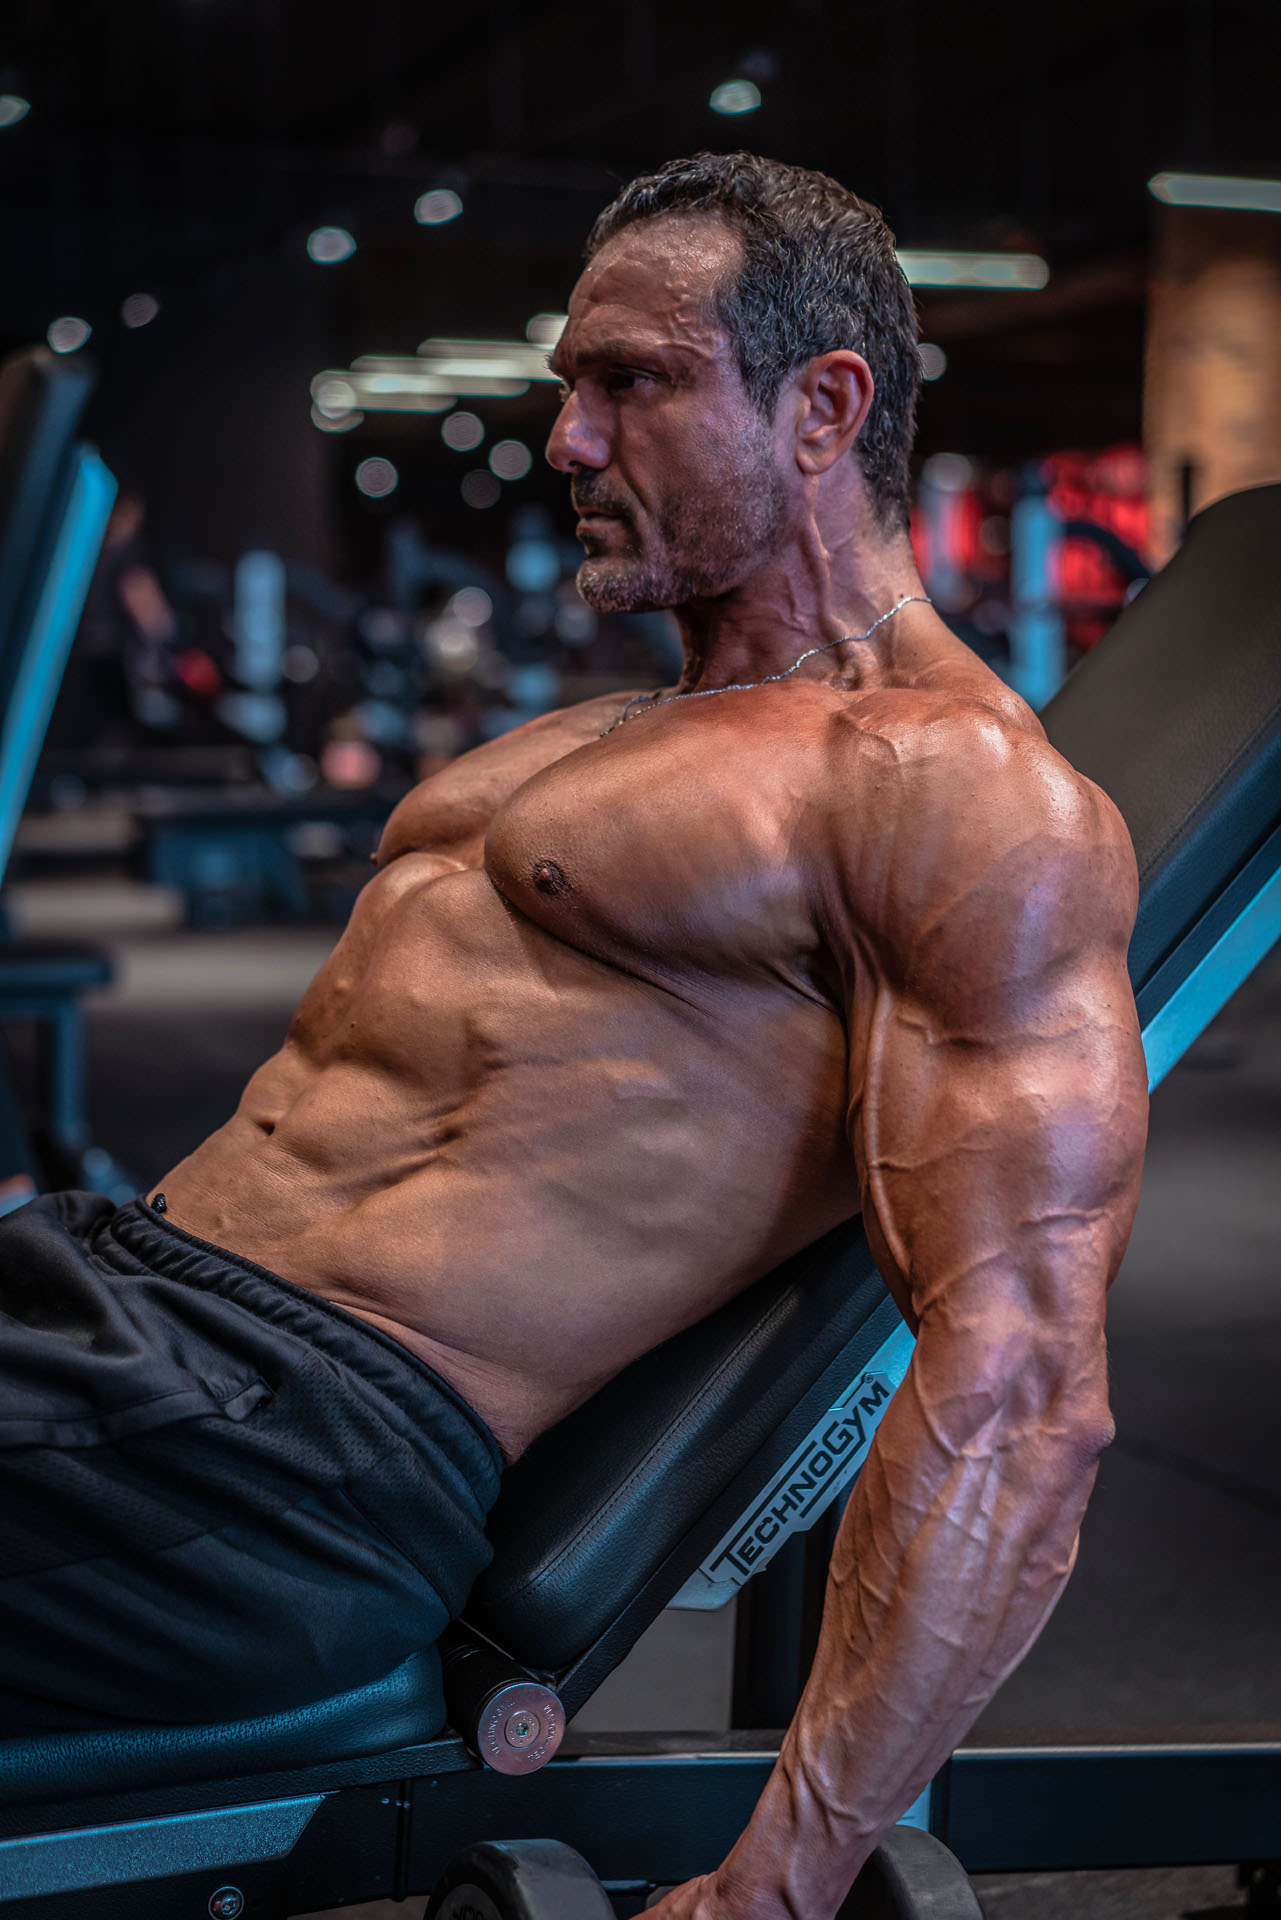 2019-03-04 - Enzo - Muscle & Fitness - 06818 - 1920px